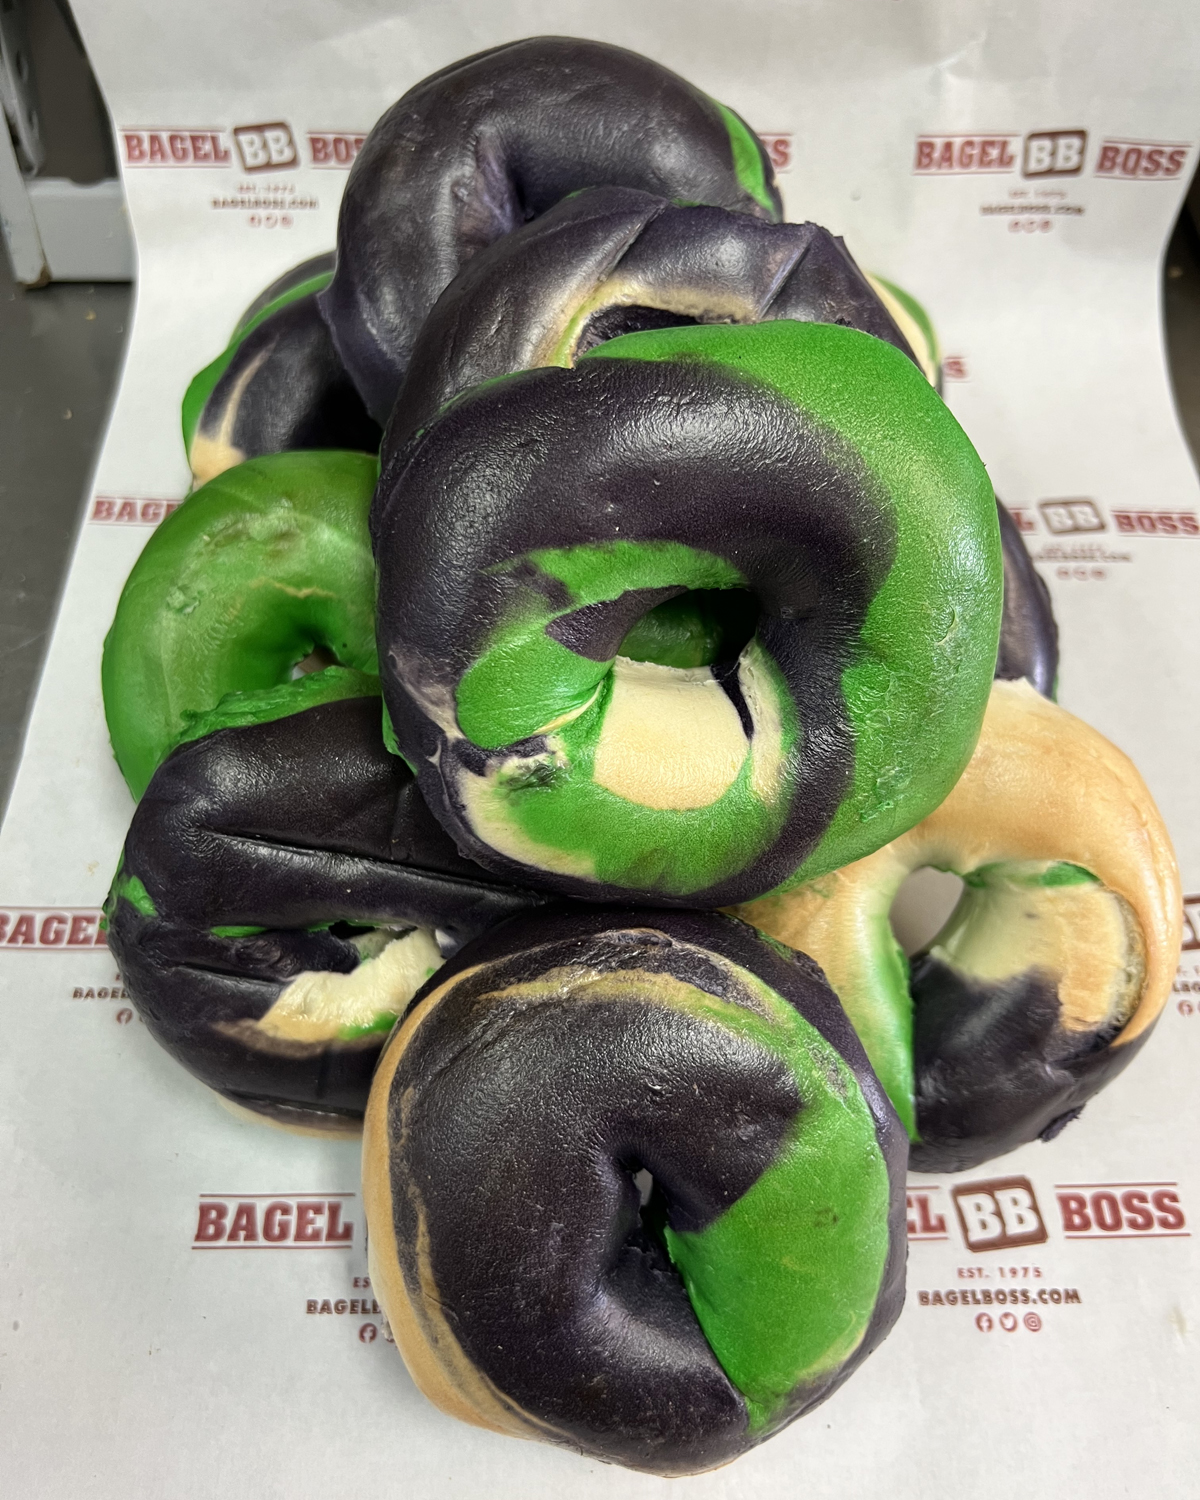 Special Bagels from Bagel Boss supports Farmingdale High School